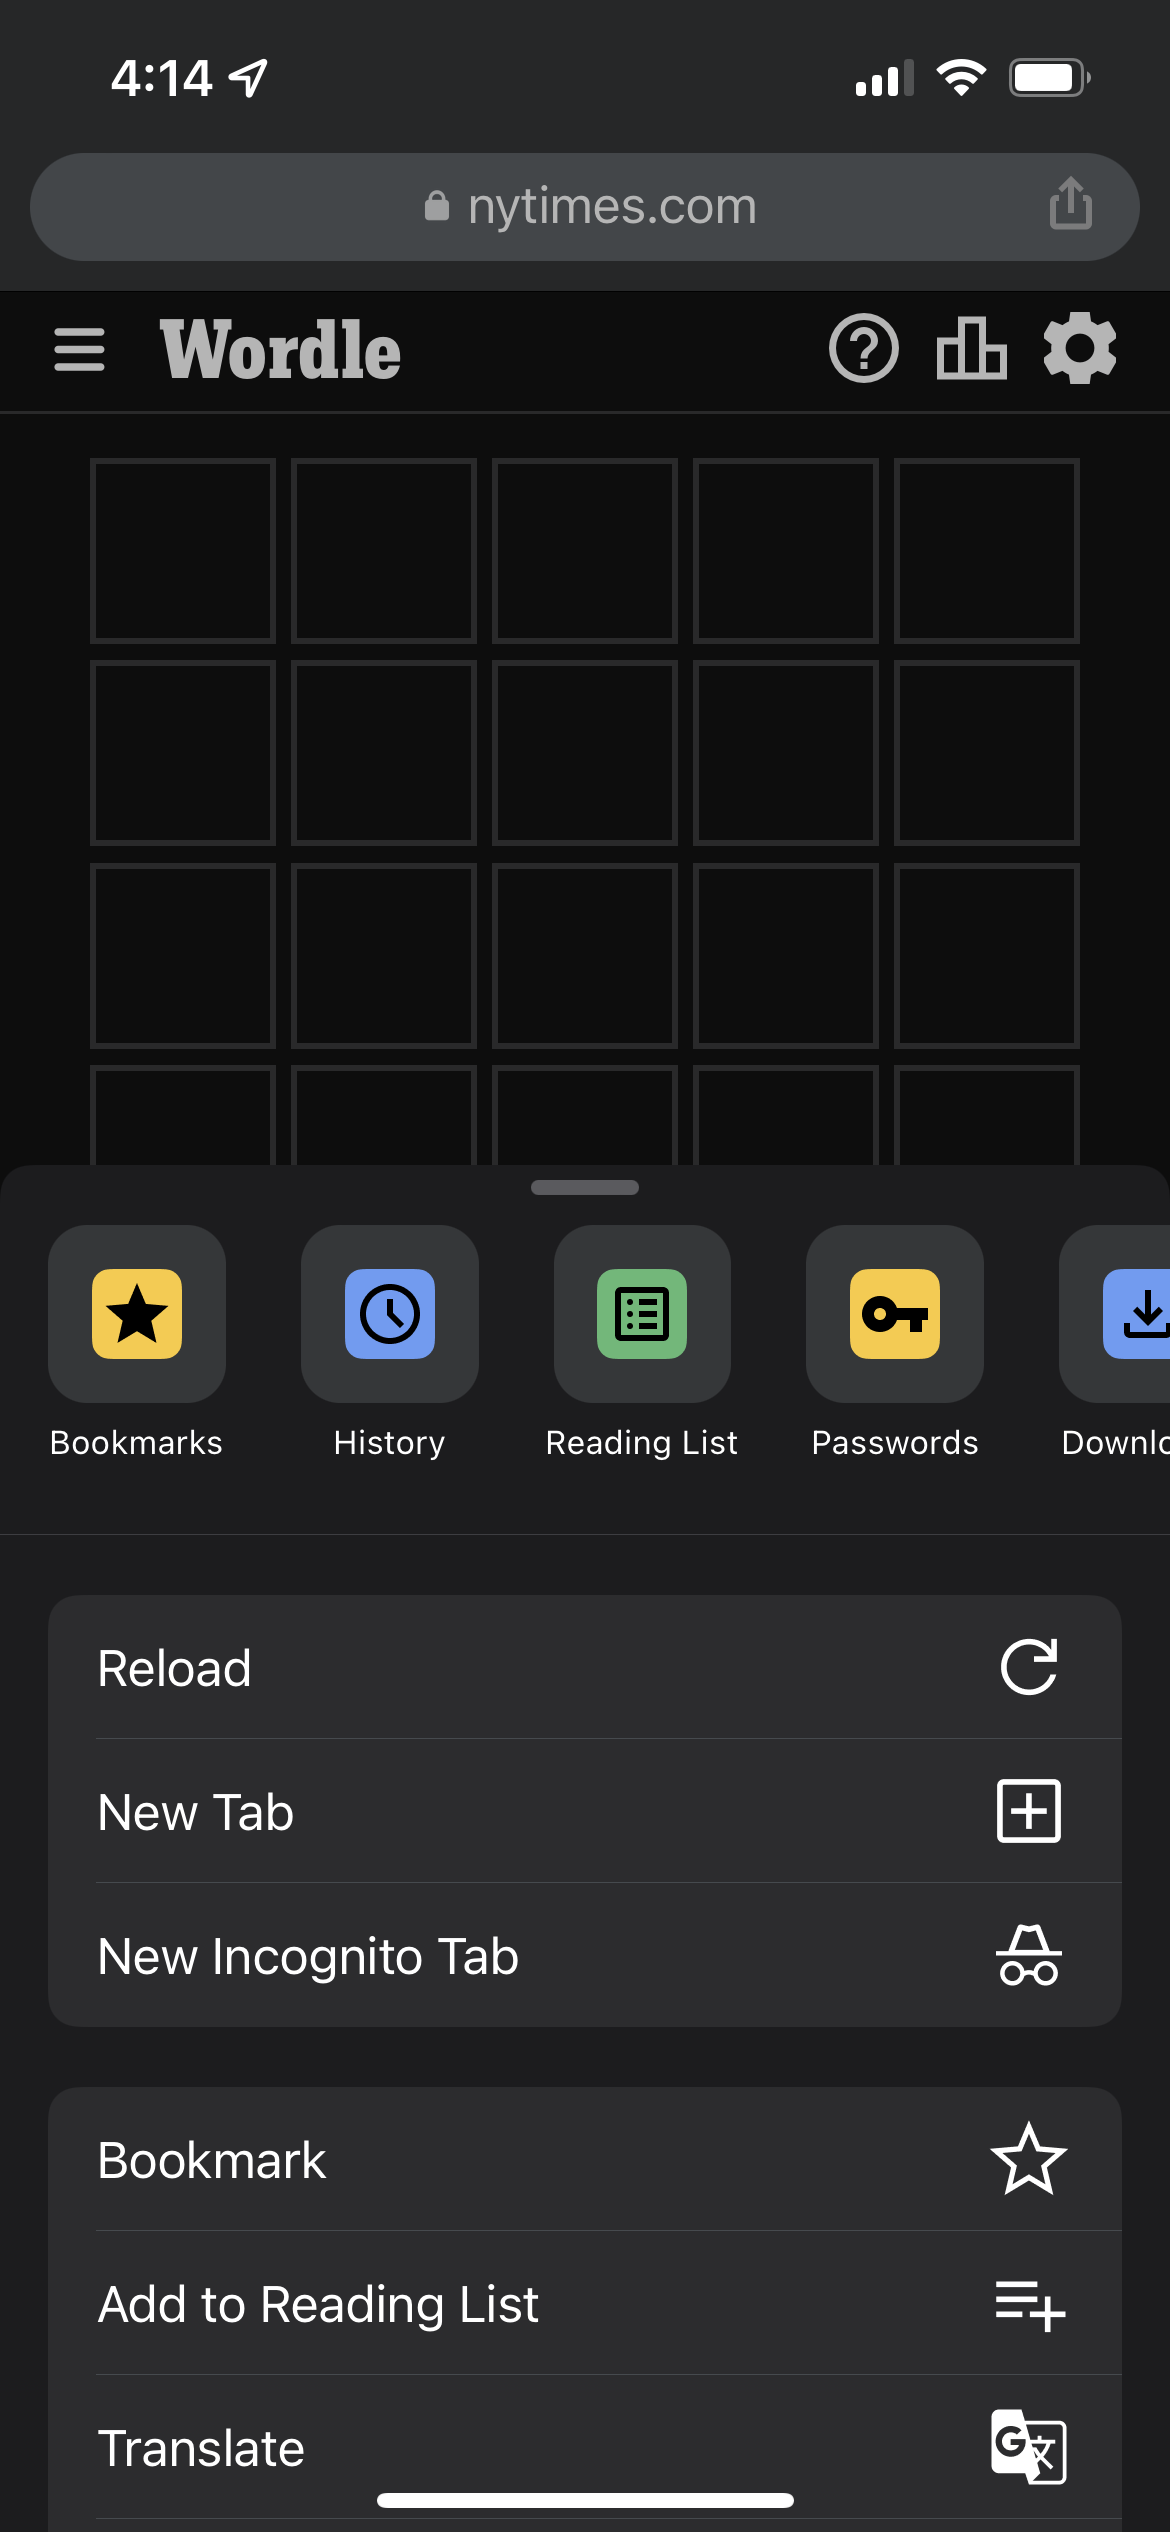 The More menu in Chrome for iPhone